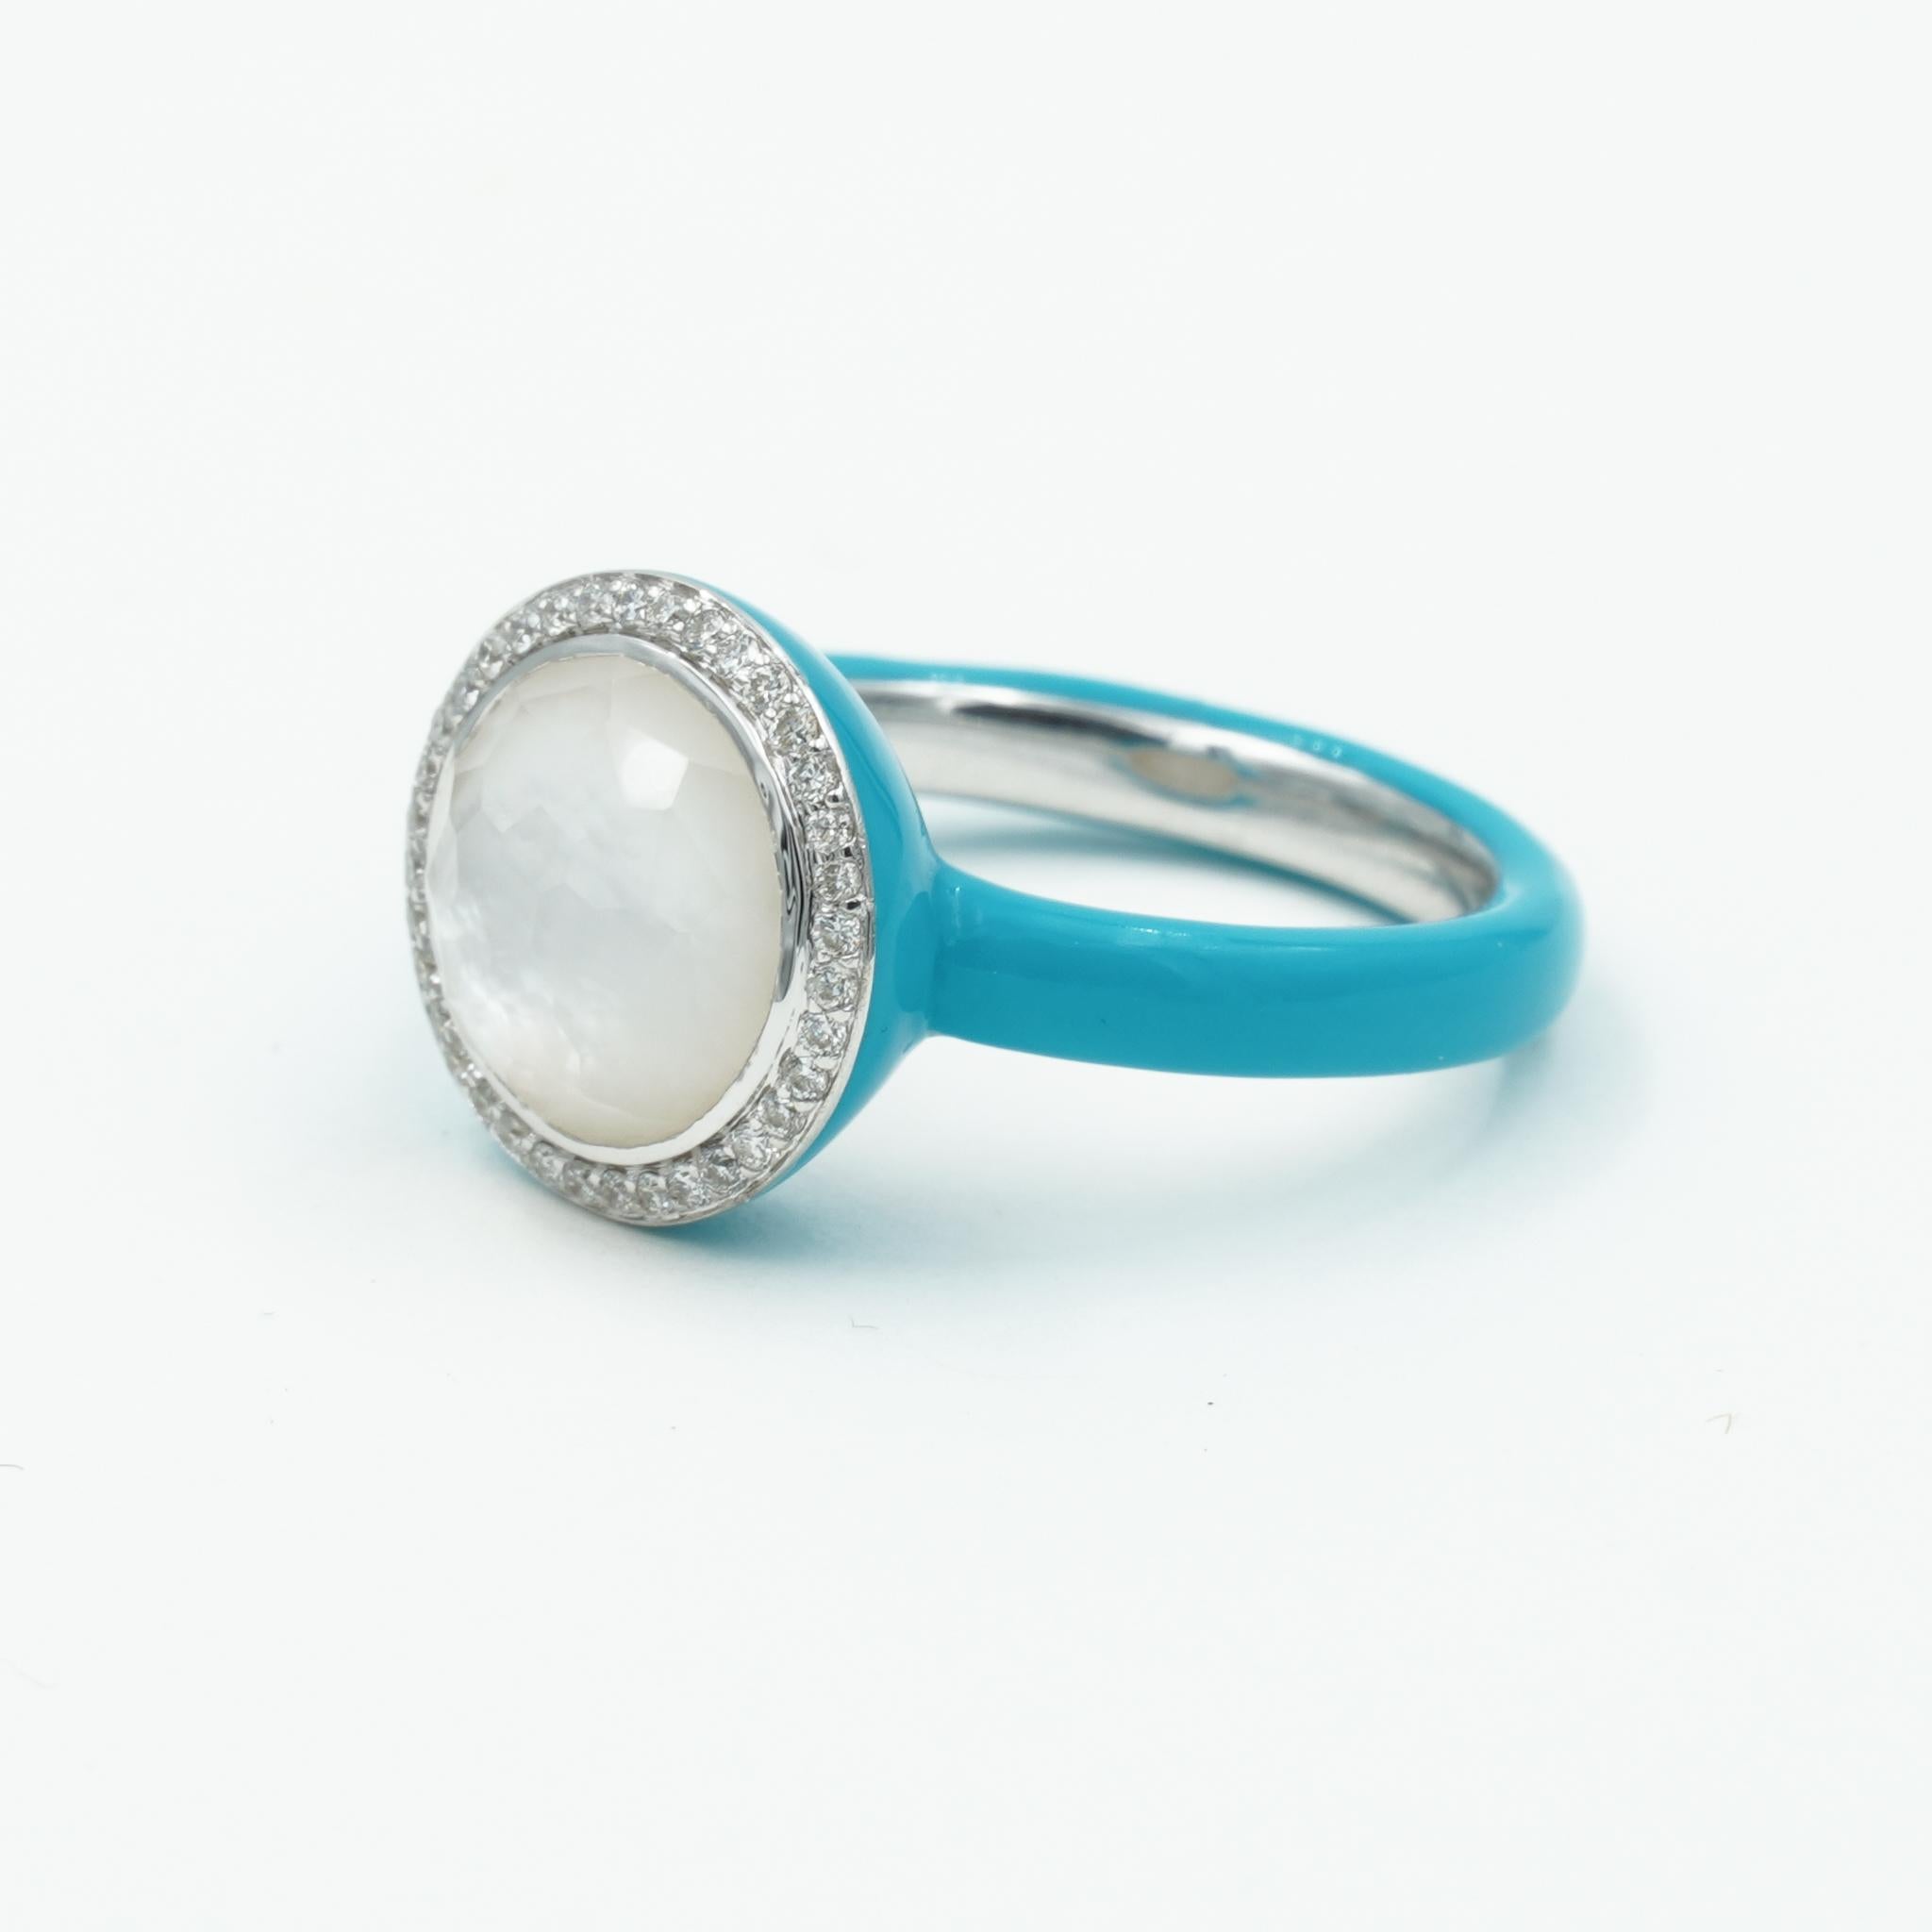 Mixed Cut Ippolita Clear Quartz, Mother of Pearl & Diamond Enamel Ring in Sterling Silver